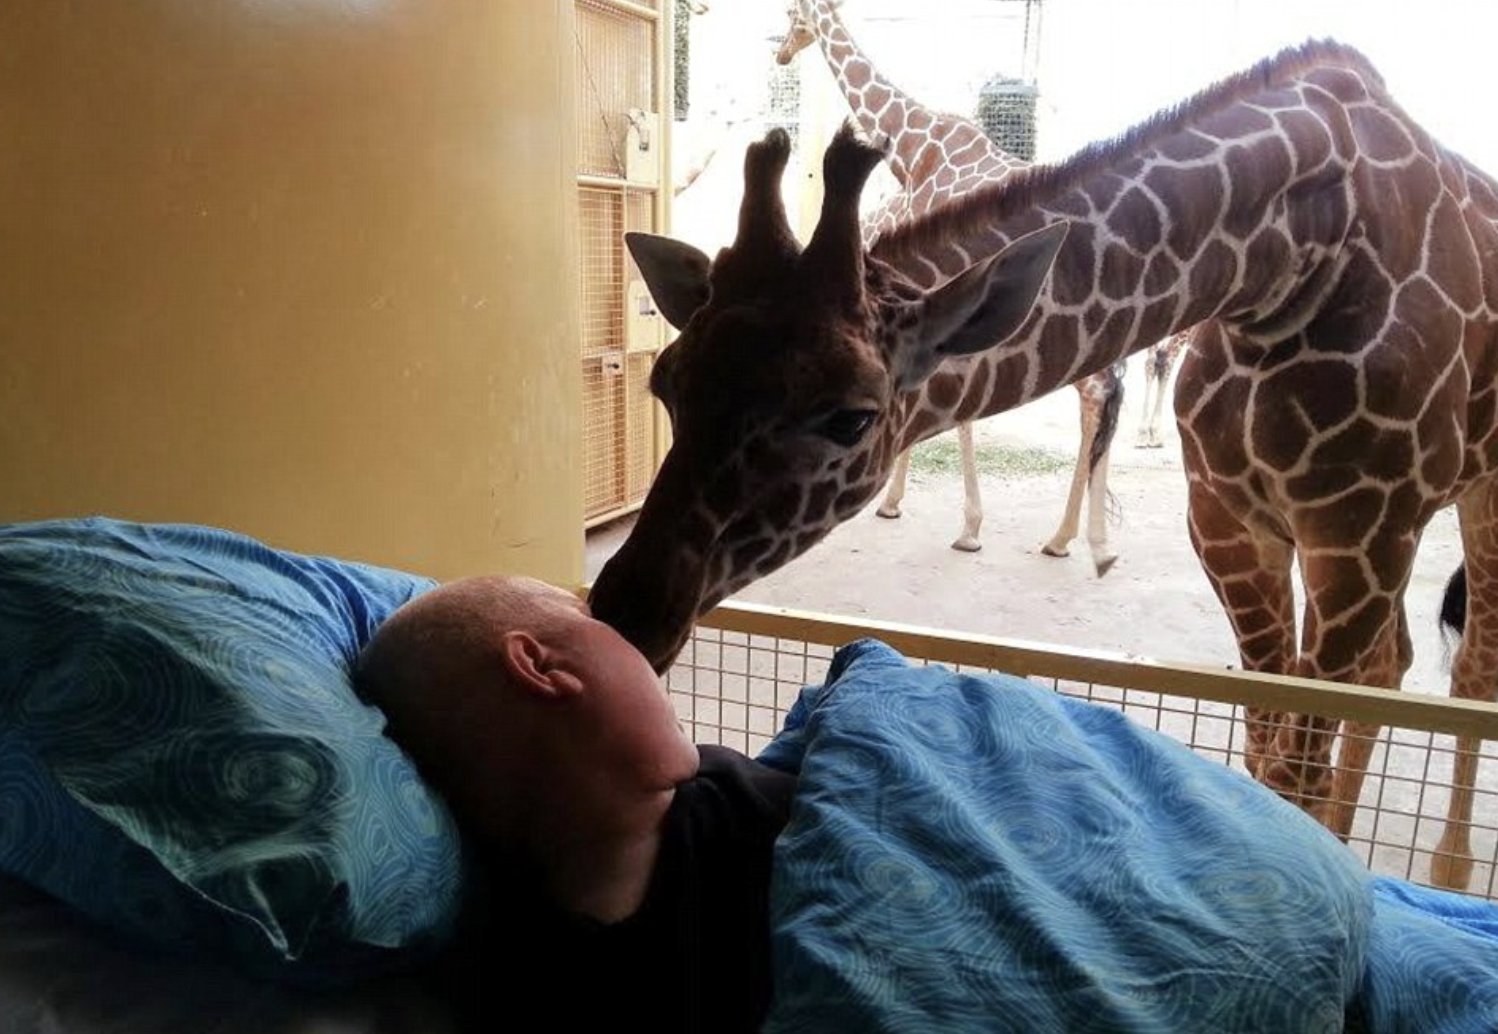 Mario dedicated 25 years to caring for zoo animals, especially beloved giraffes.